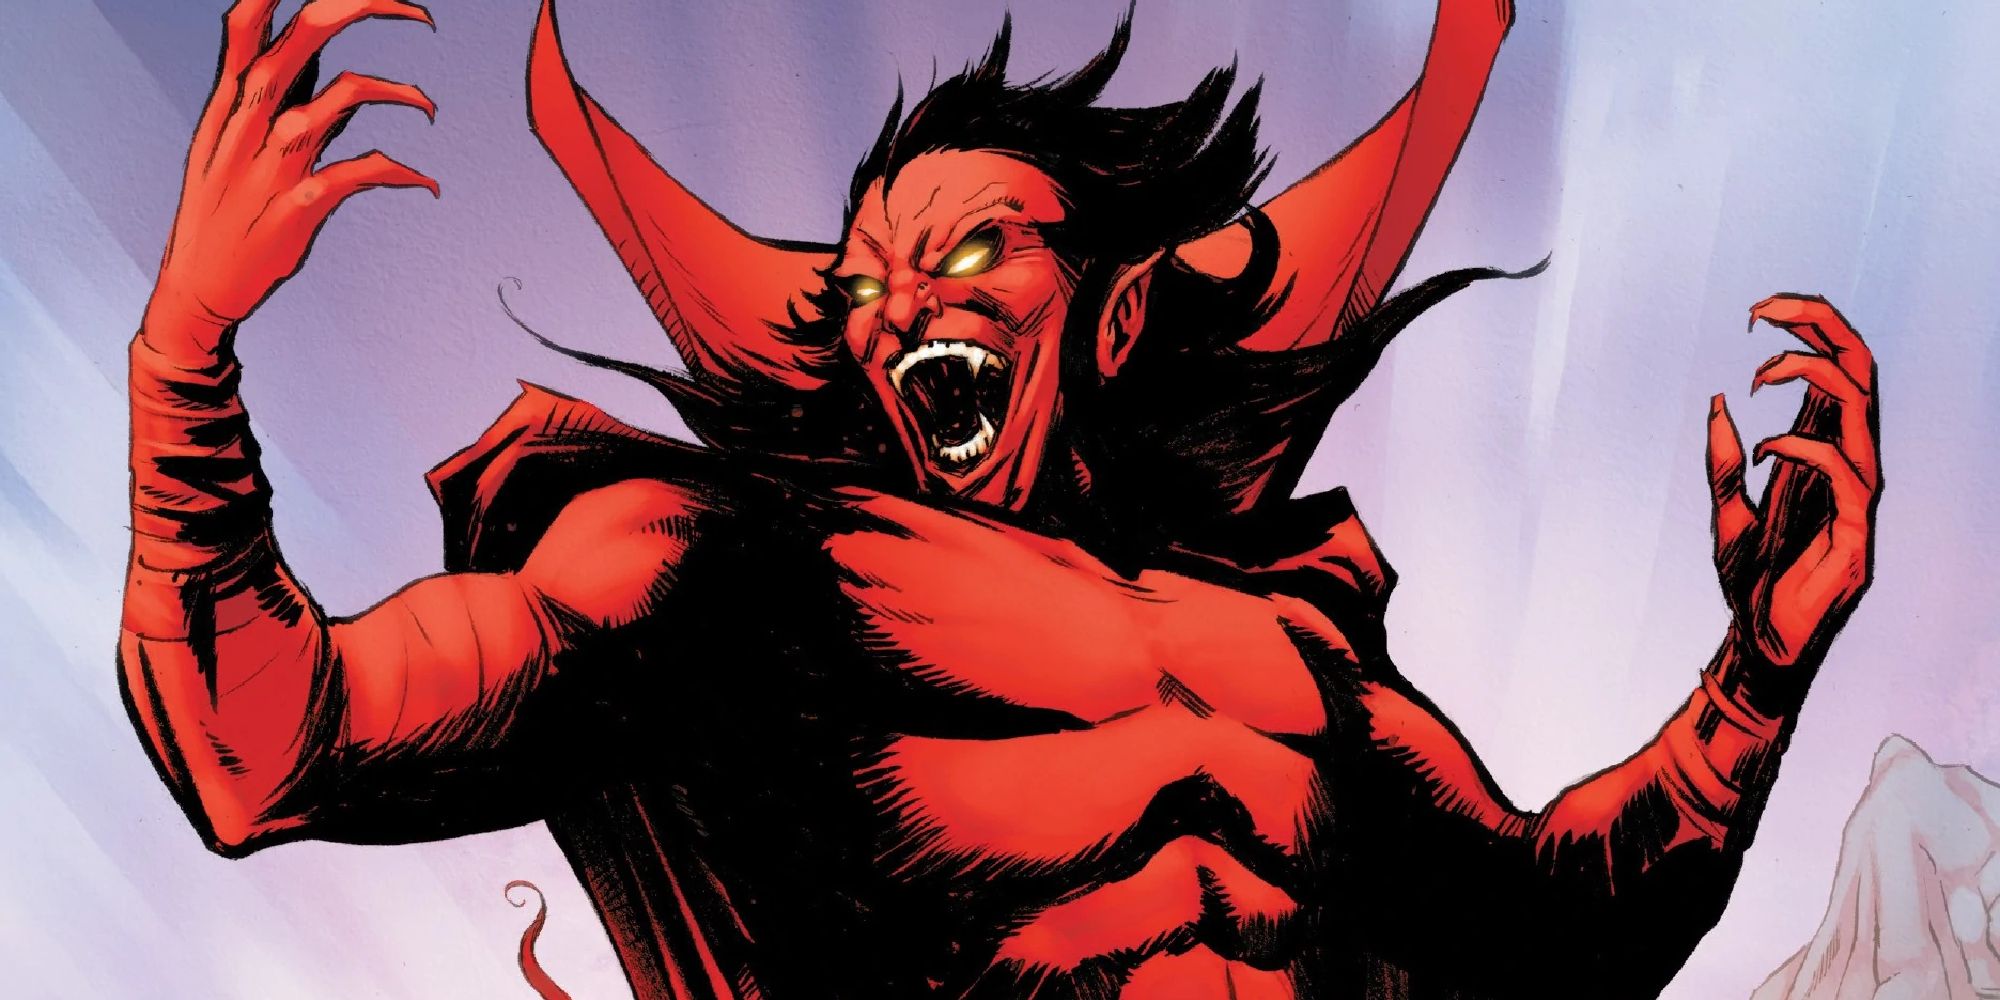 Mephisto as he appears in Marvel Comics